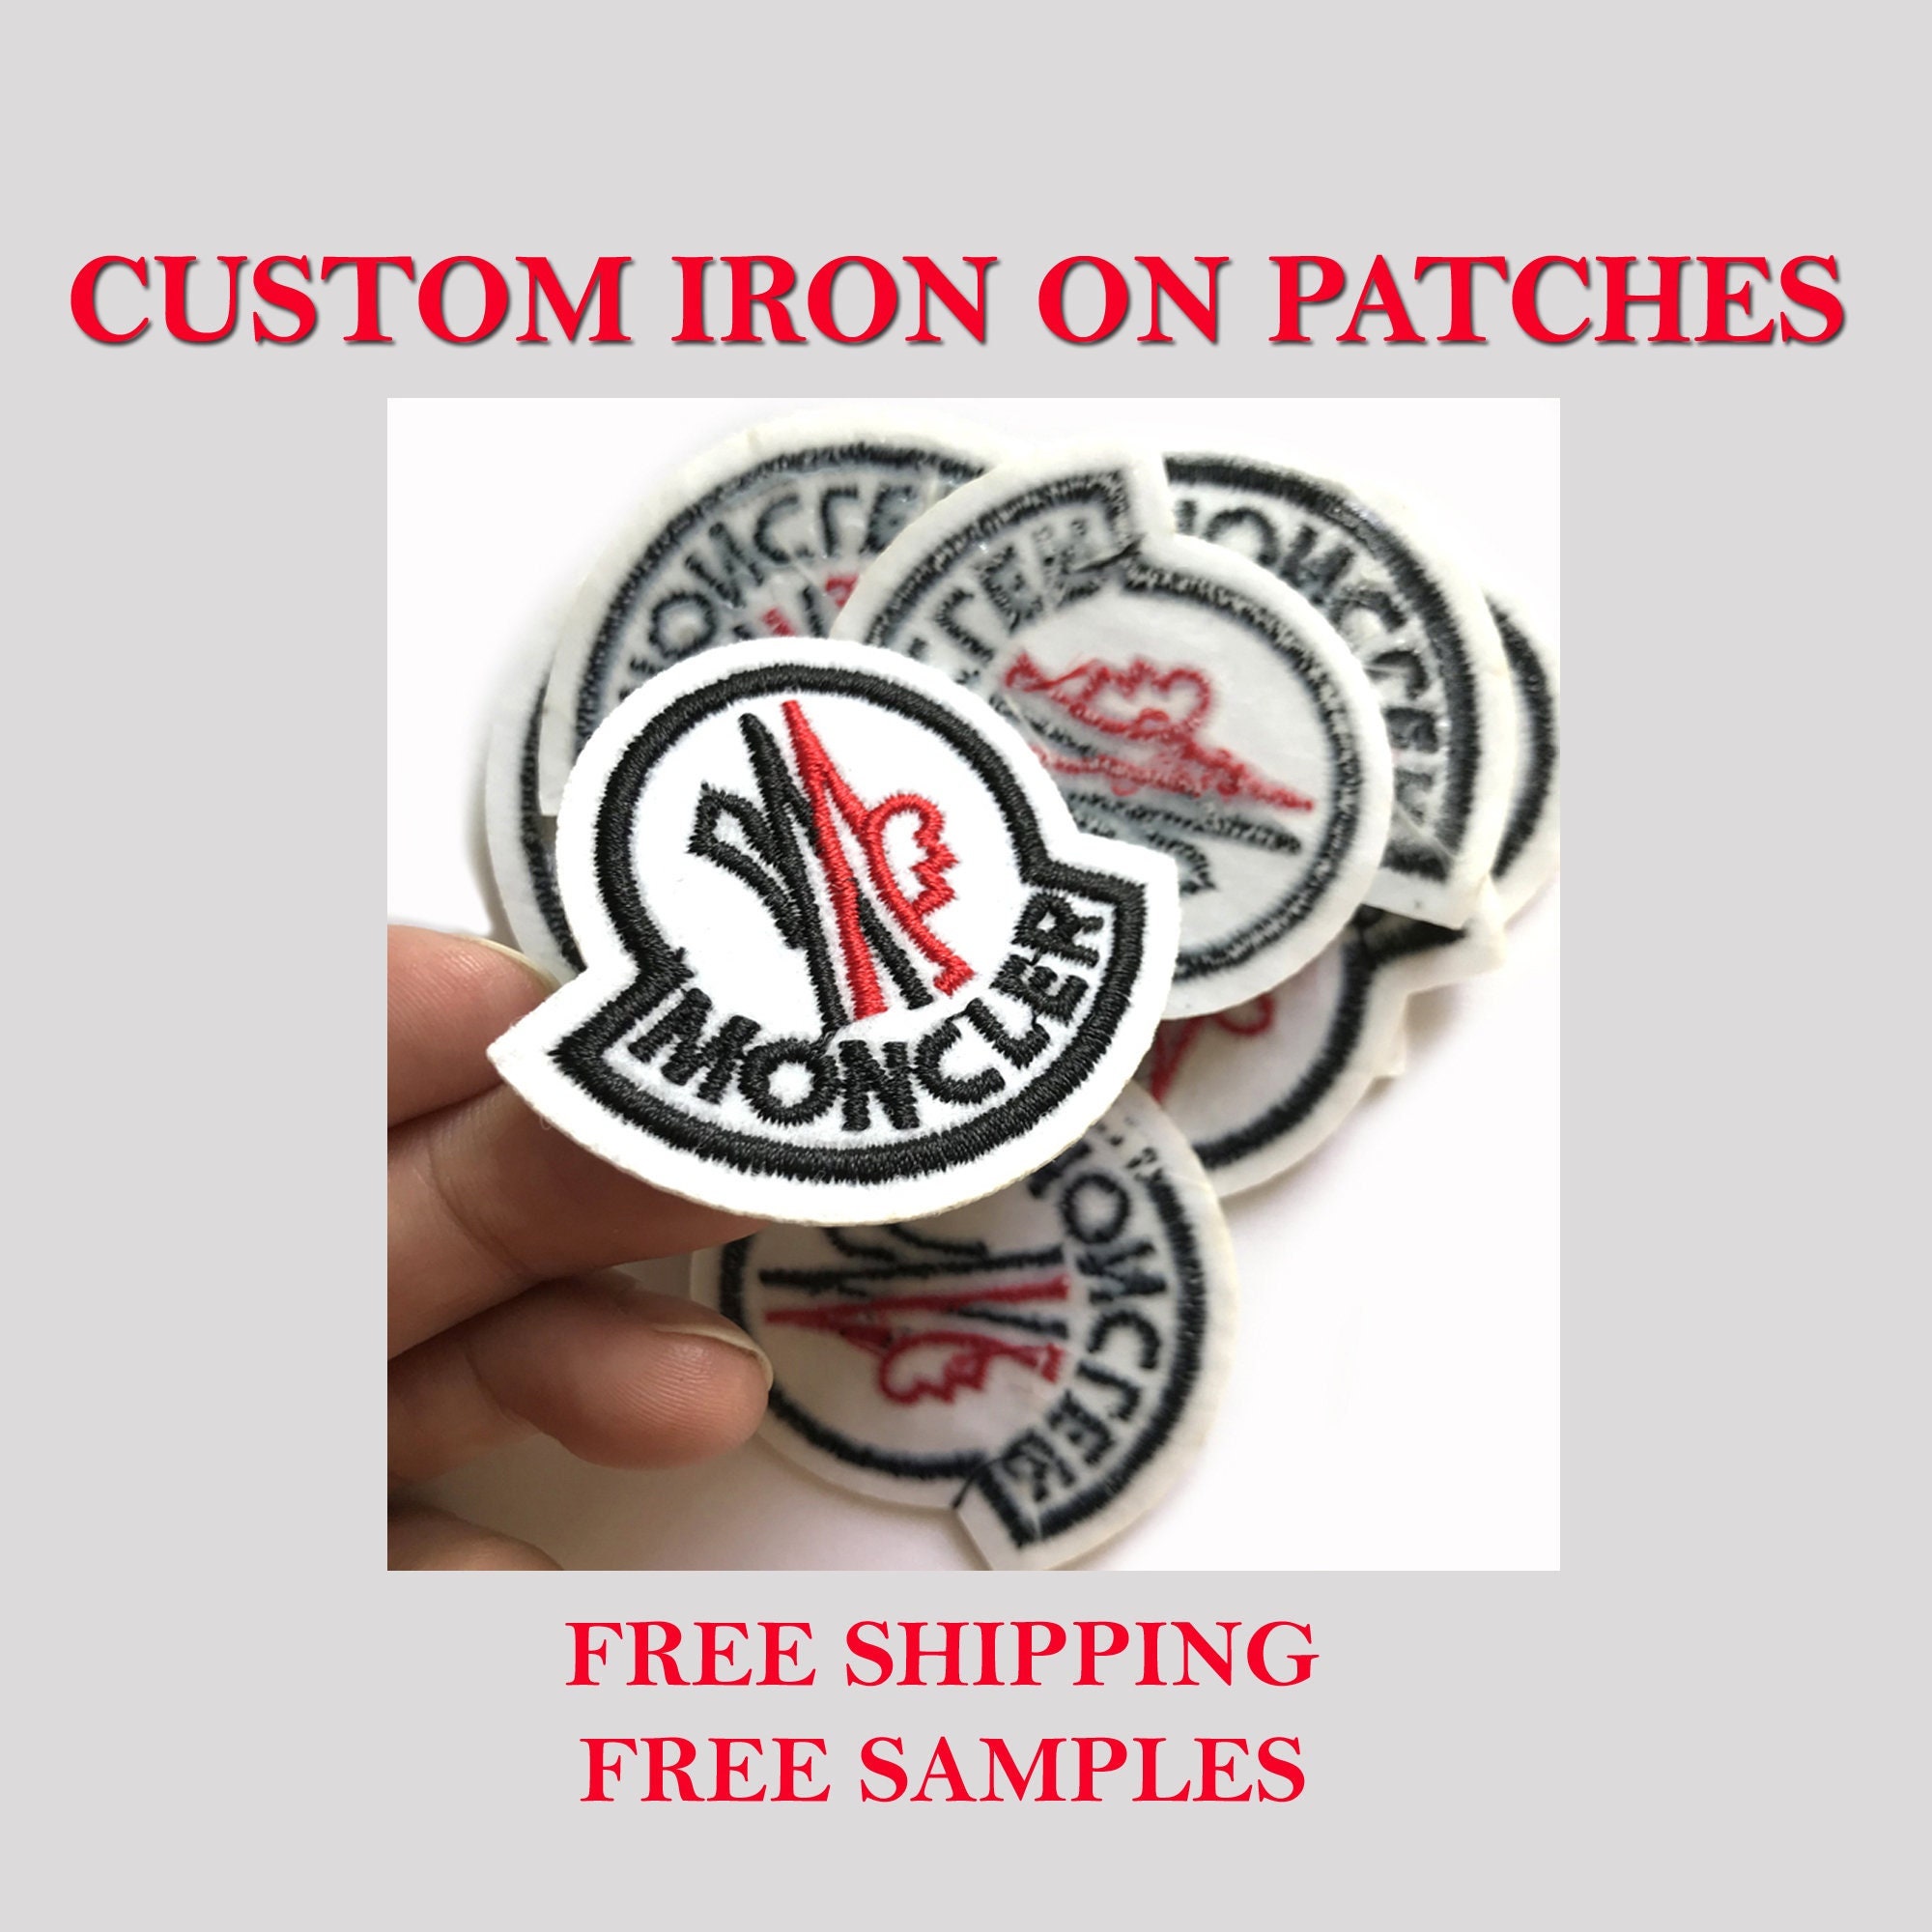 How To Apply Custom Iron On Patches - Monterey Company